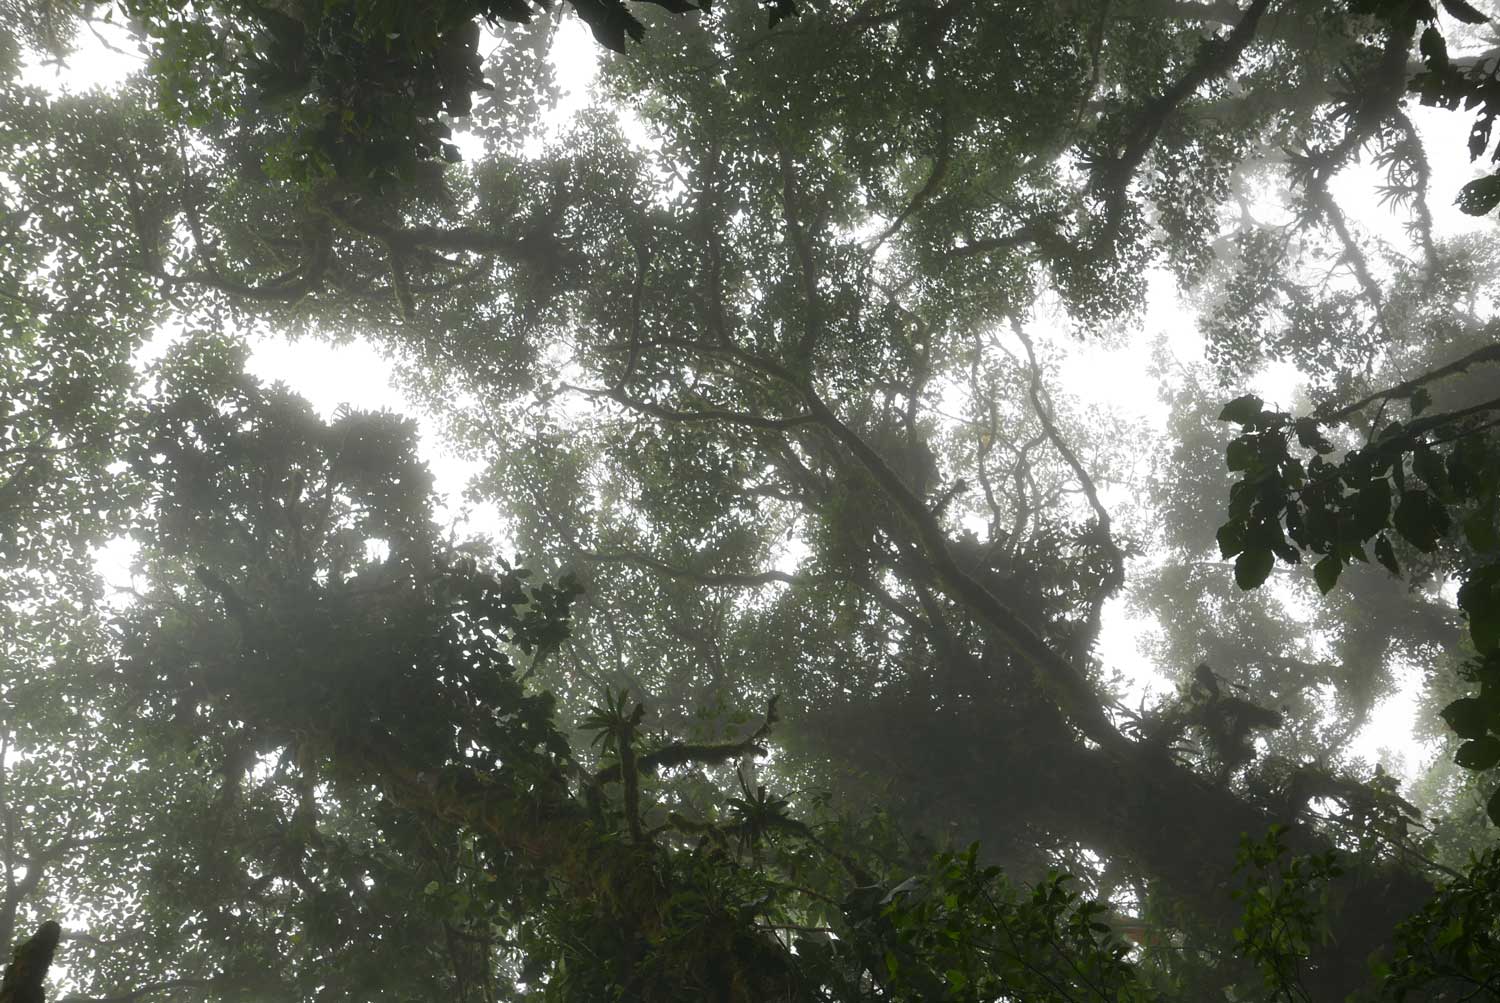 Amazing view of the treetops almost shutting out the sunlight in Santa Elena cloud forest